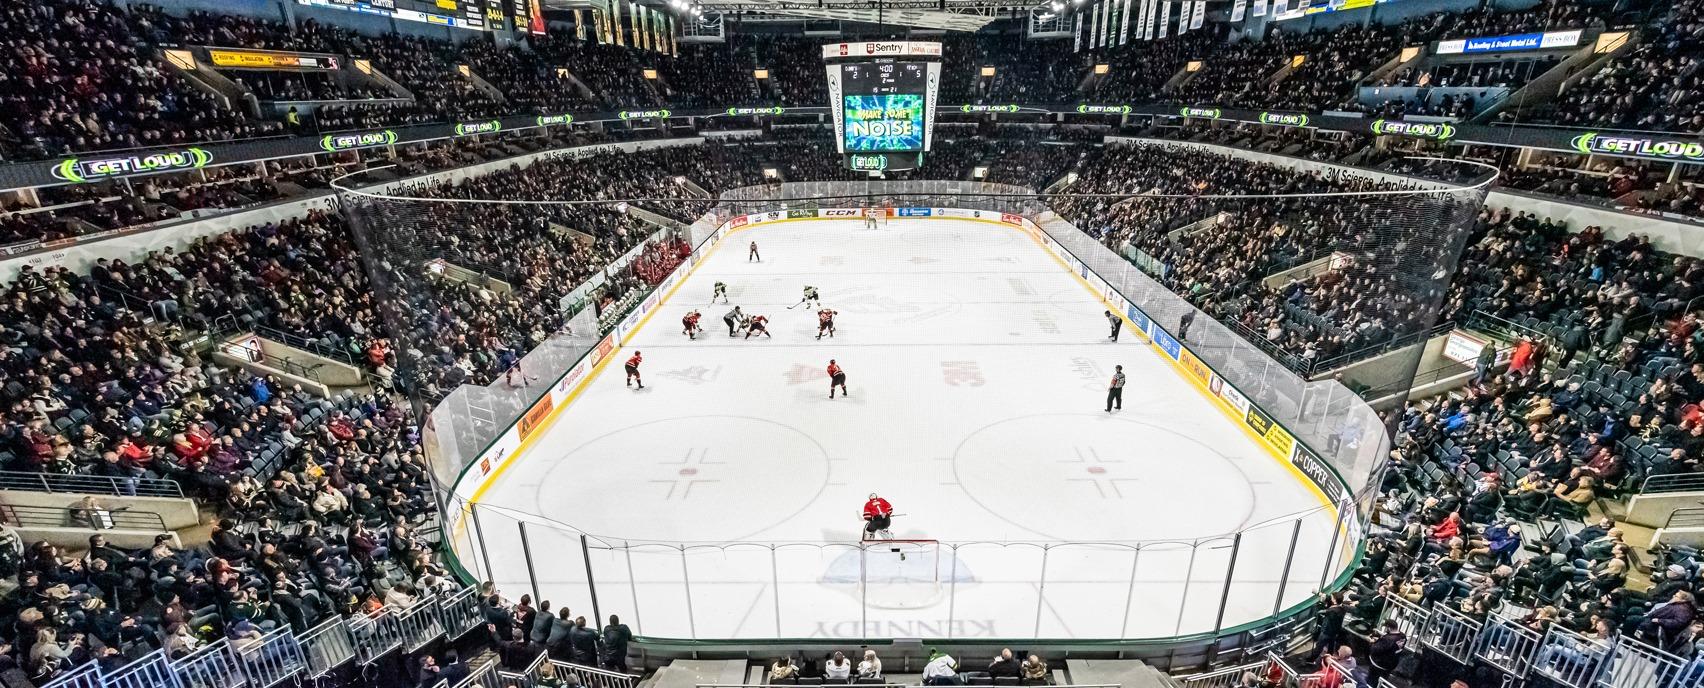 A London Knights hockey game live at a packed Budweiser Gardens located in London, Ontario